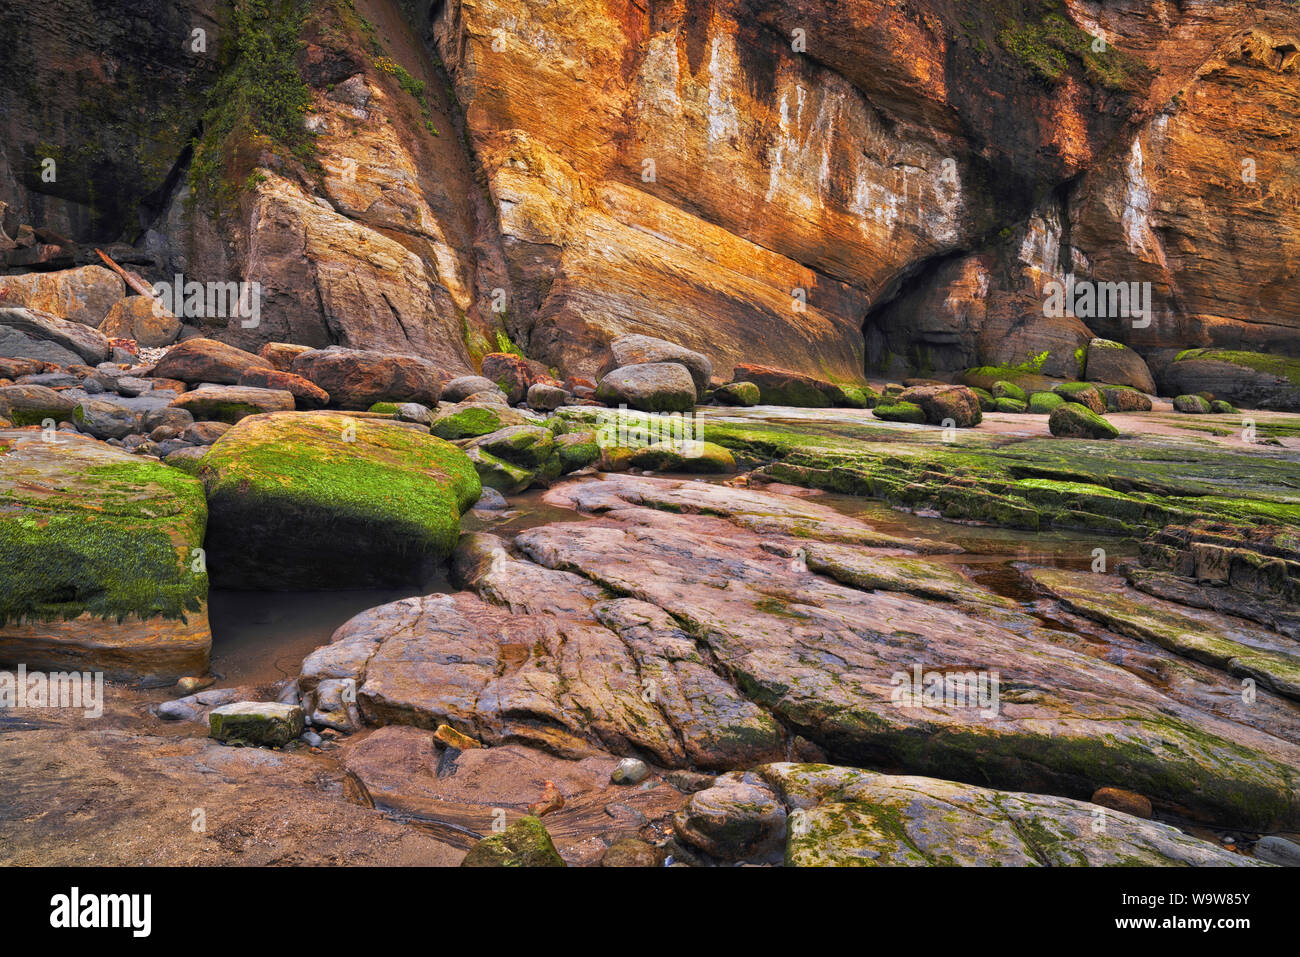 A minus low tide offers a temporary exploration among the sandstone walls of Devils Punchbowl on Oregon’s central coastline. Stock Photo